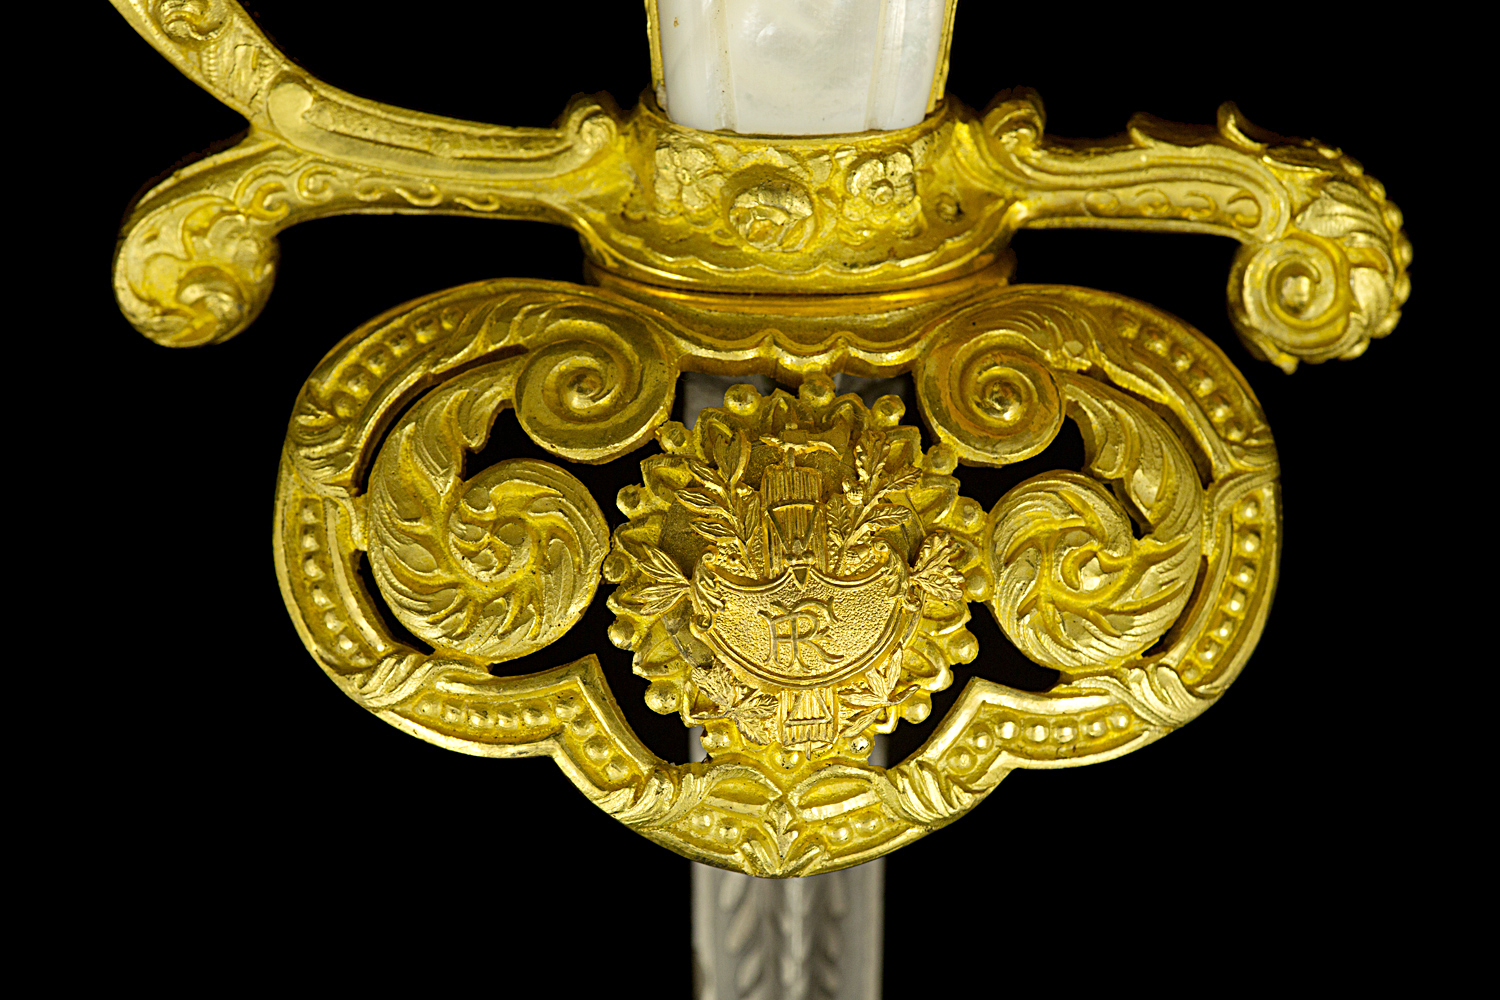 S000022_French_3rd_Republic_Smallsword_Detail_Shell_Obverse